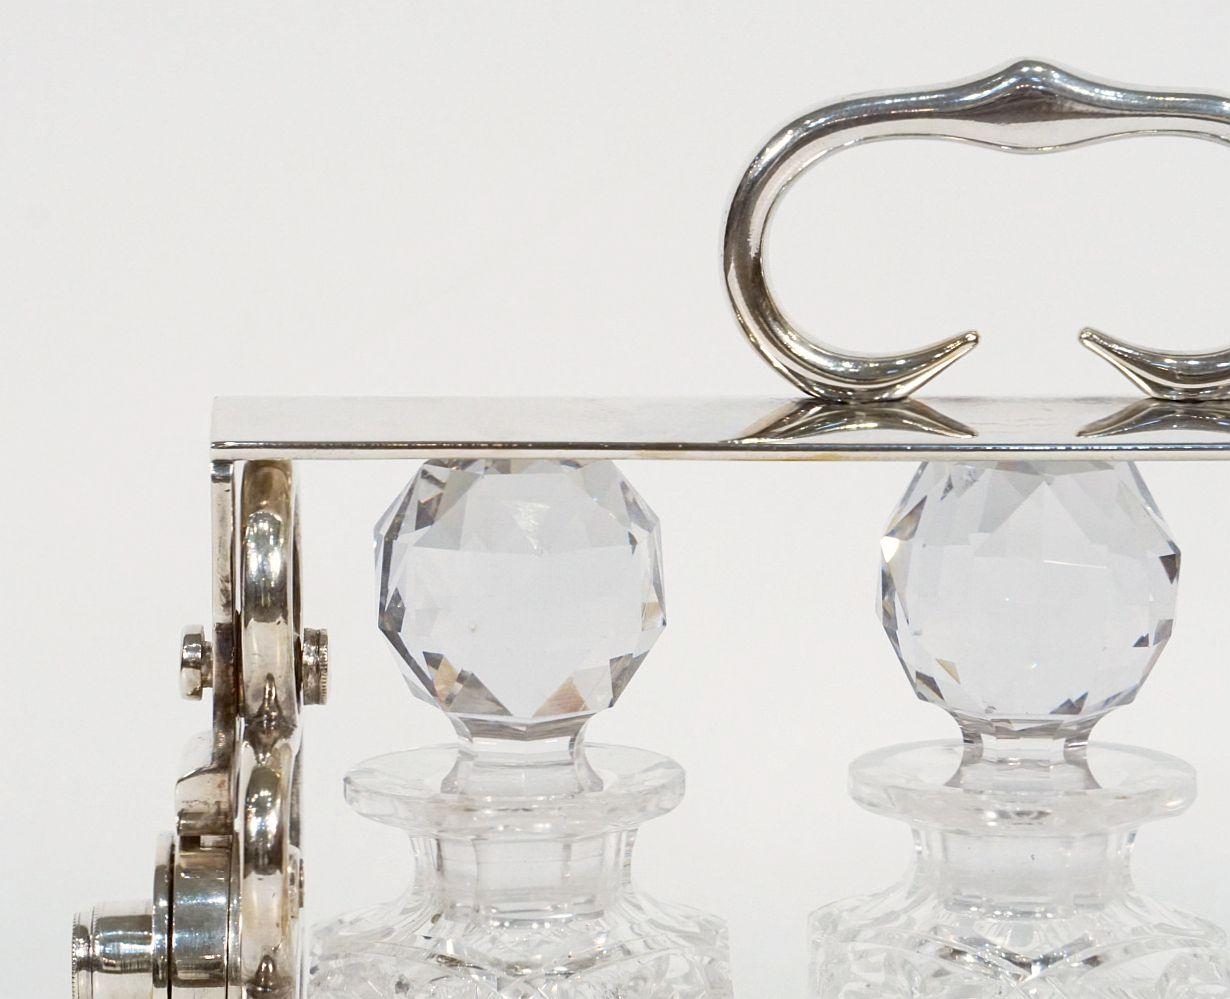 Betjemann's Three-Bottle Tantalus with Original Hobnail Crystal Decanters 6